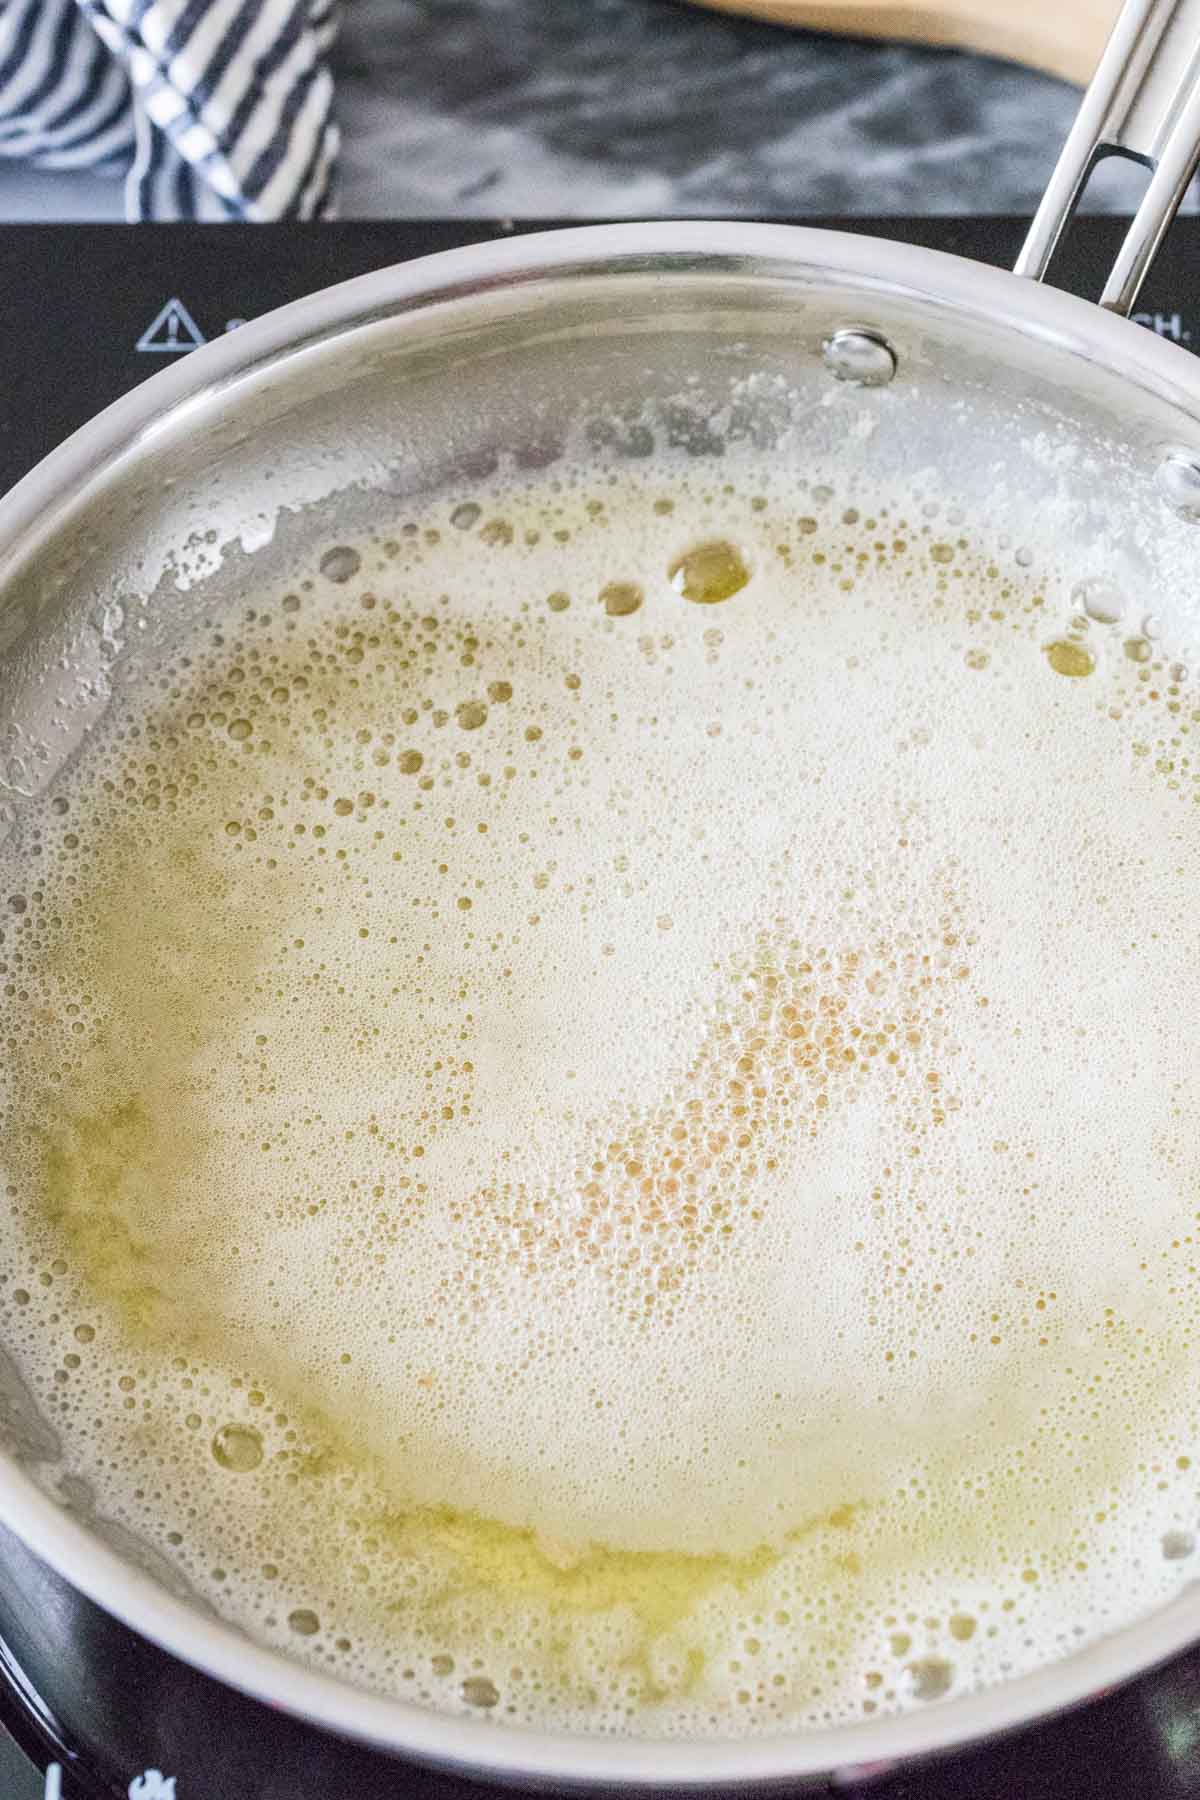 melted butter that is foaming and bubbling on the stovetop